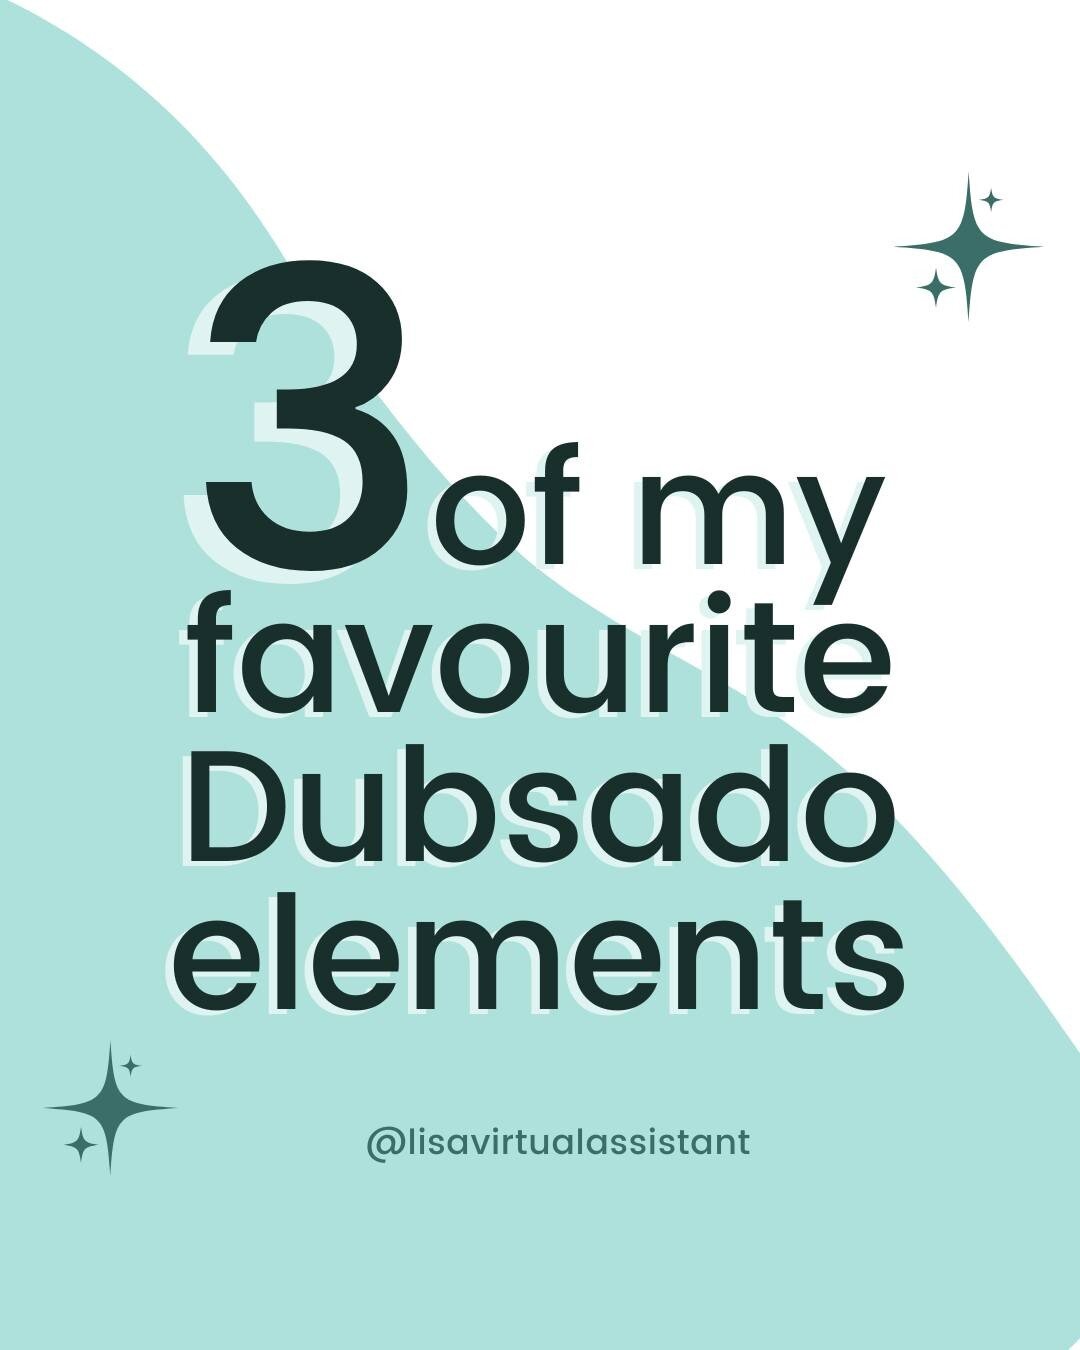 3 of my favourite Dubsado elements ✨

Its no secret that Dubsado is my number one CRM (Customer Relationship Management) tool.

There is SO much to love in Dubsado, but I&rsquo;ve shortlisted my FAVOURITE elements in today&rsquo;s post!

✨ CLIENT POR